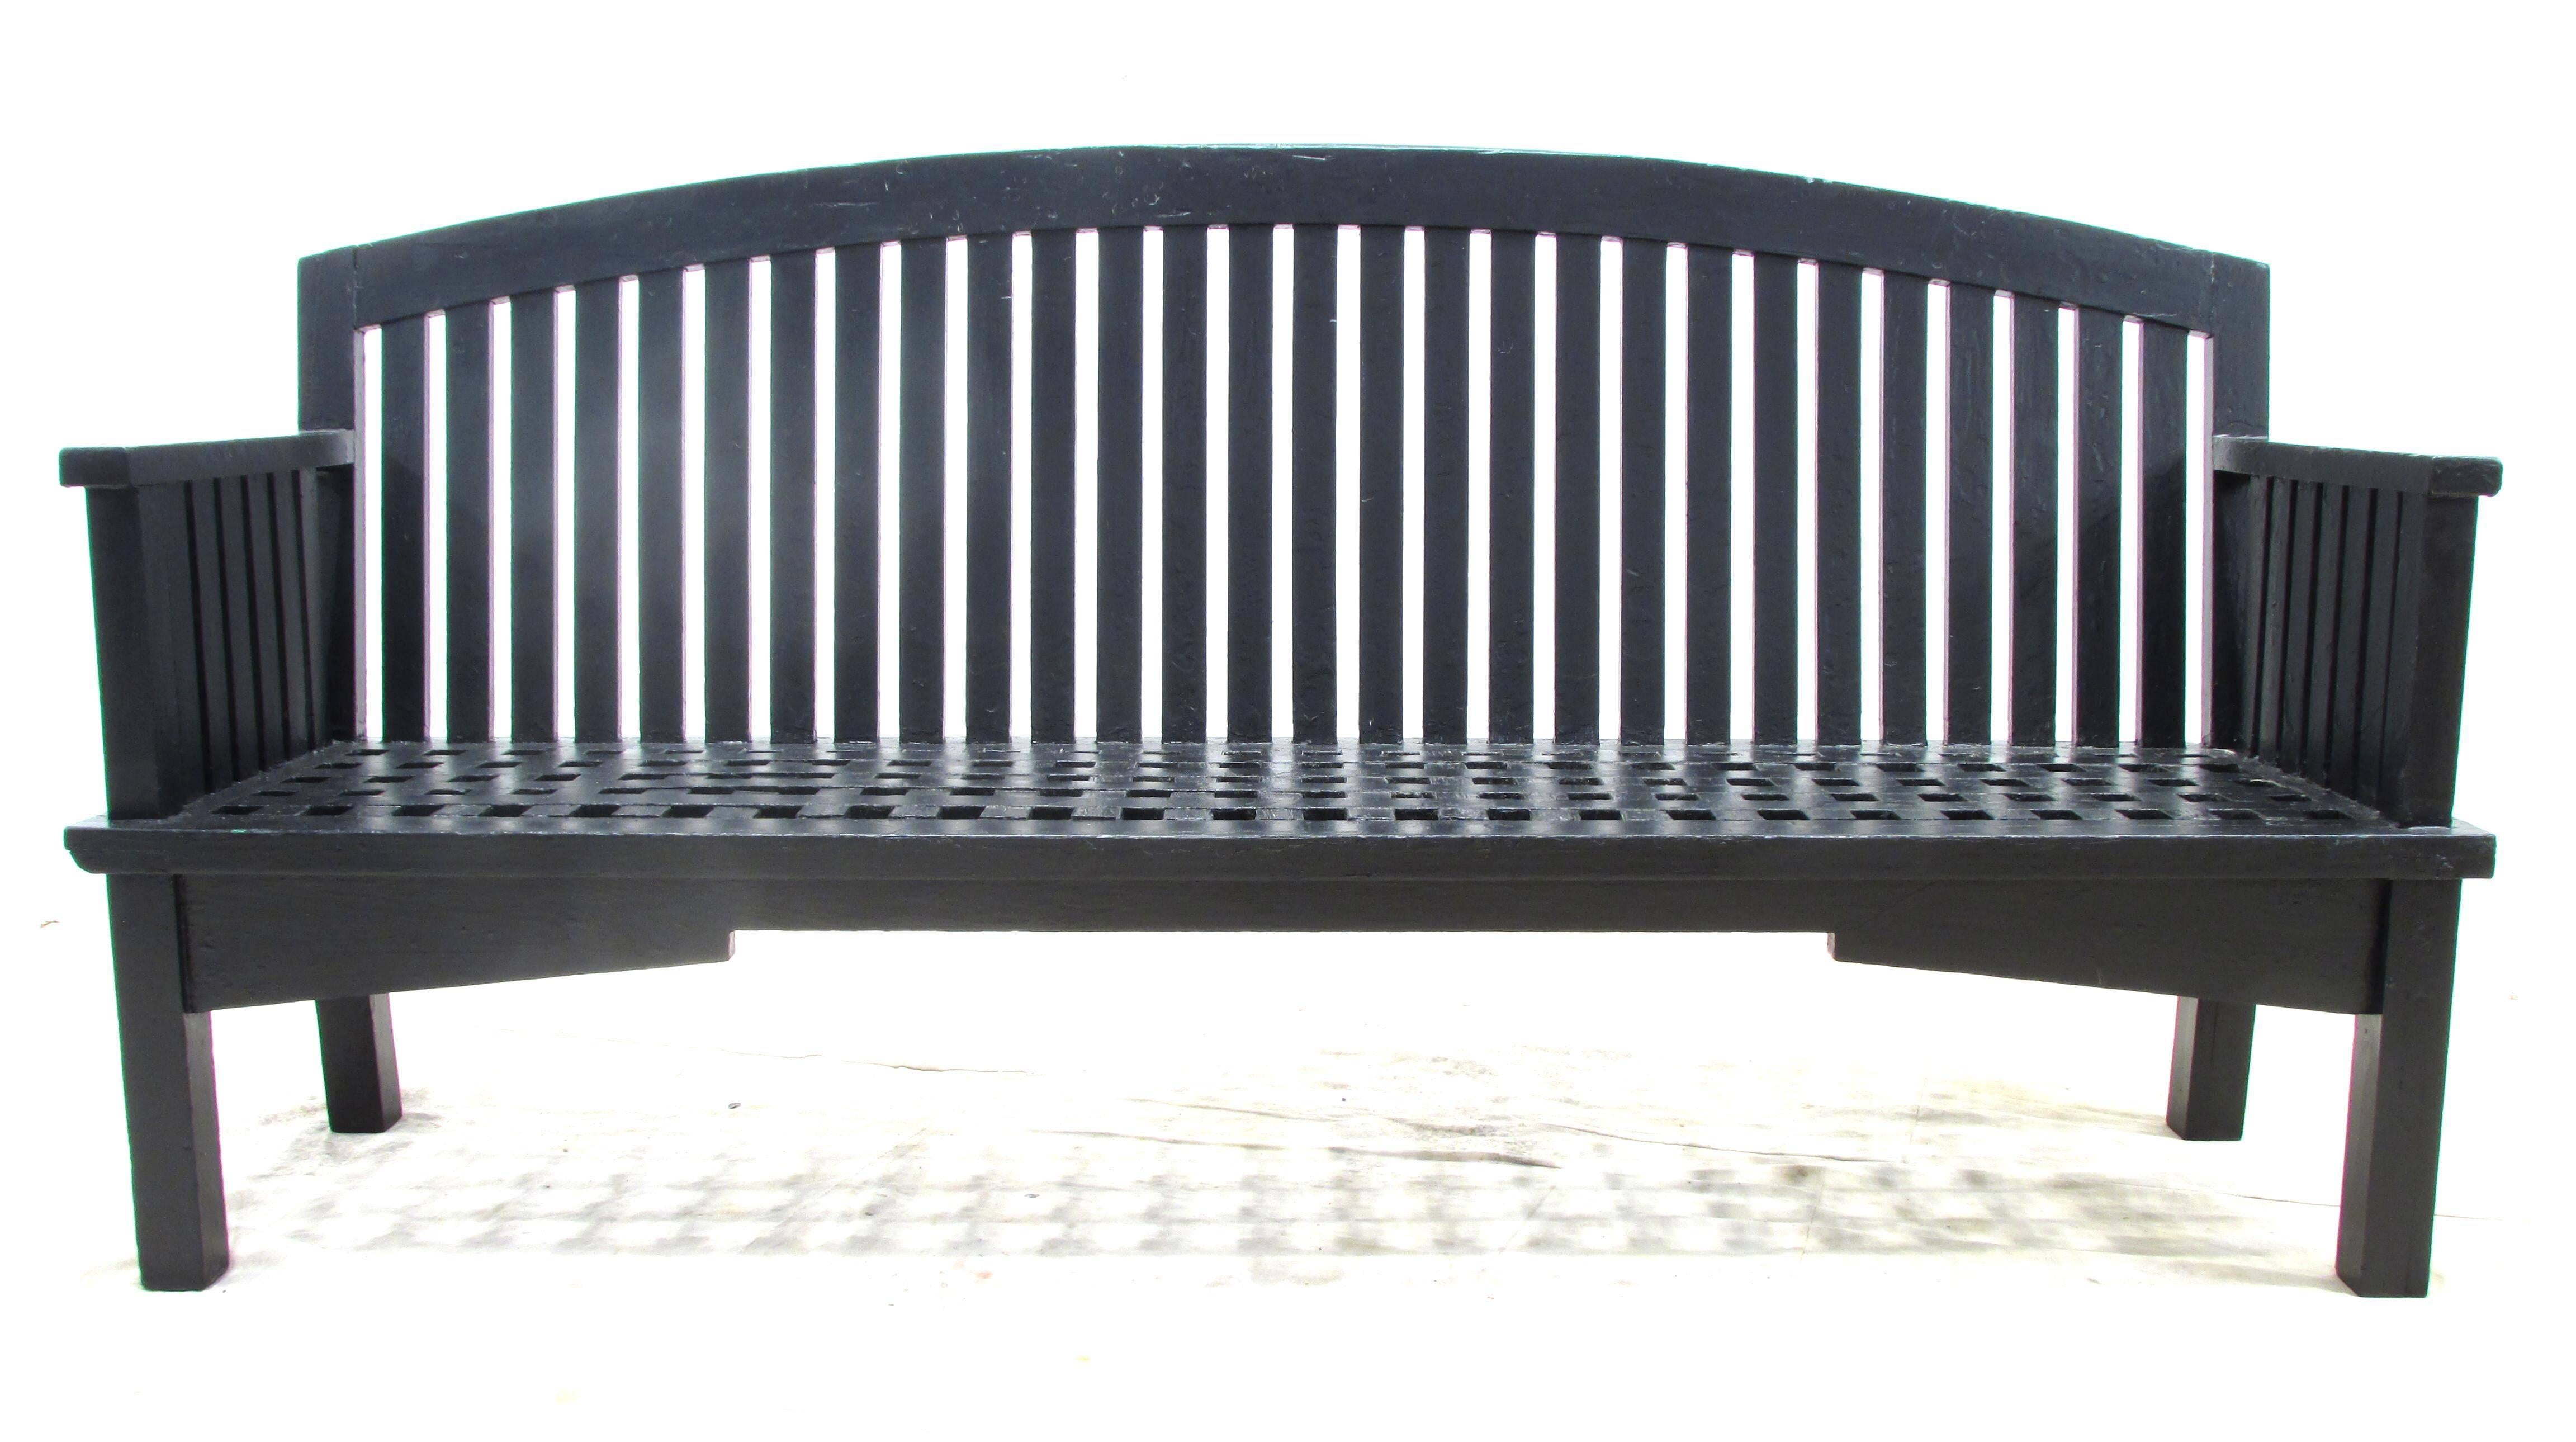 Black painted long wooden garden bench with intricate designed seat and back from Philadelphia late 19th century to early 20th century.